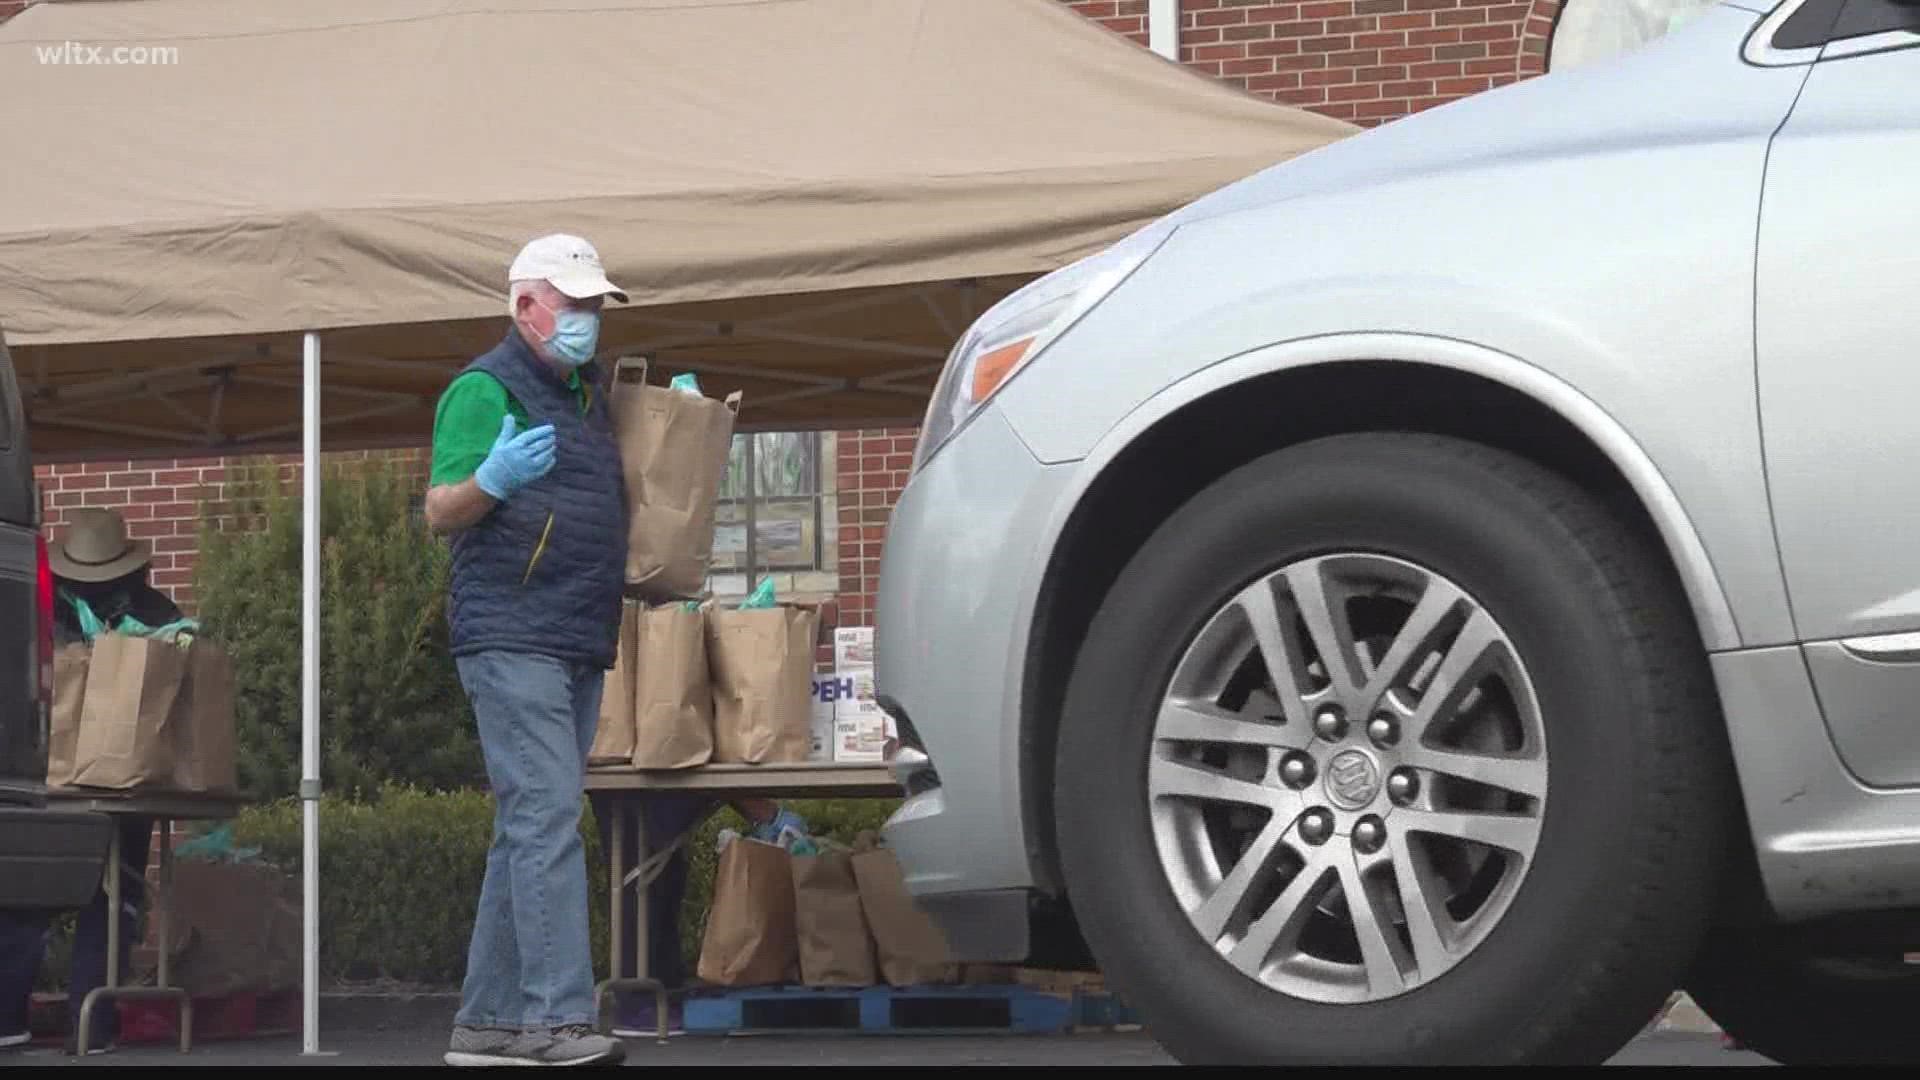 The First Baptist Community Improvement Corporation started in 2019. In partnership with Harvest Hope Food Bank, volunteers give out food monthly to anyone in need.